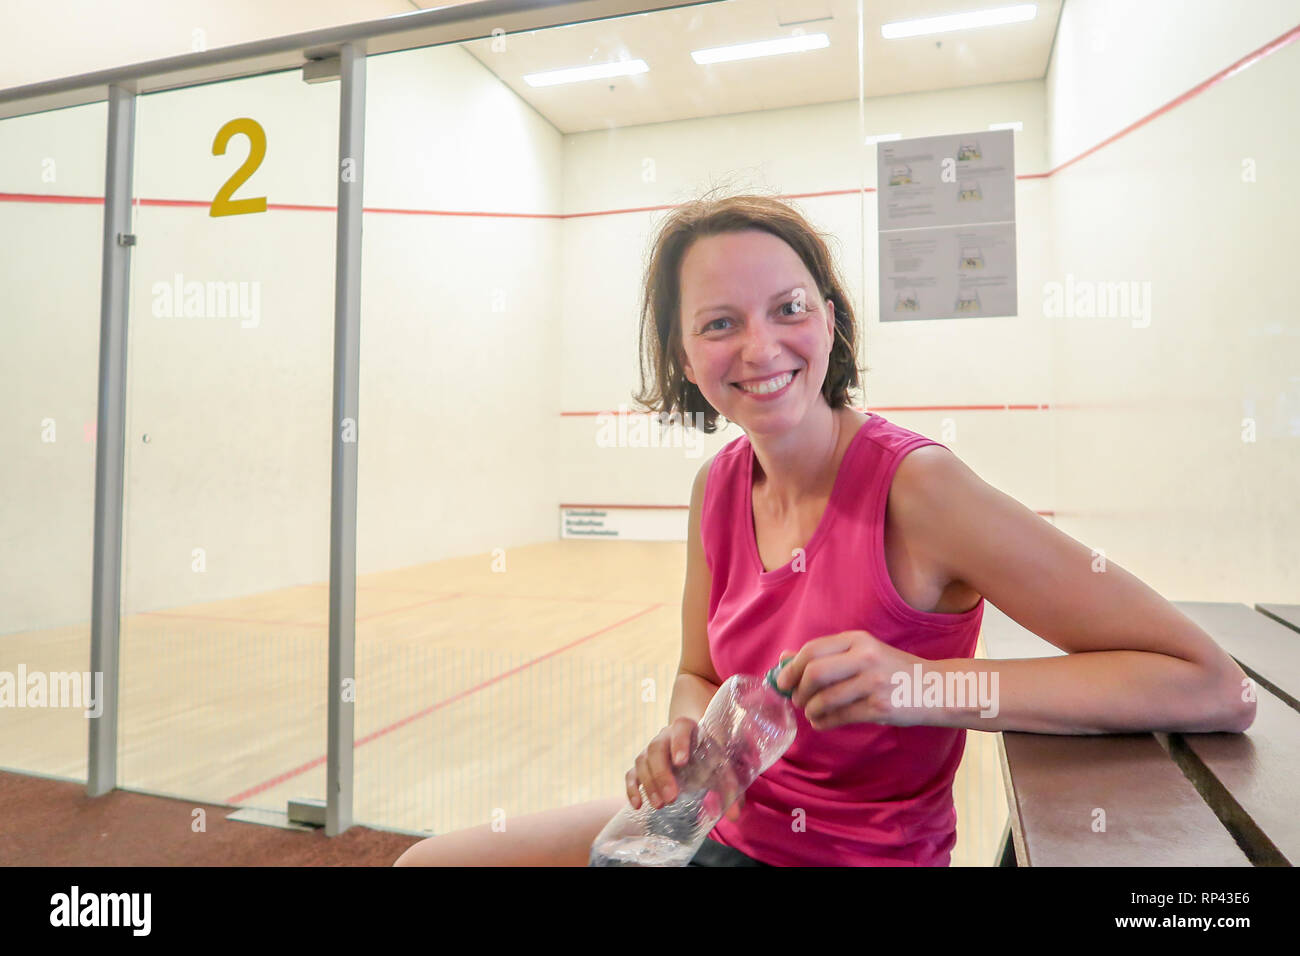 A woman takes a break from playing squash and drinks from a bottle of water for refreshment. She is smiling at the camera Stock Photo